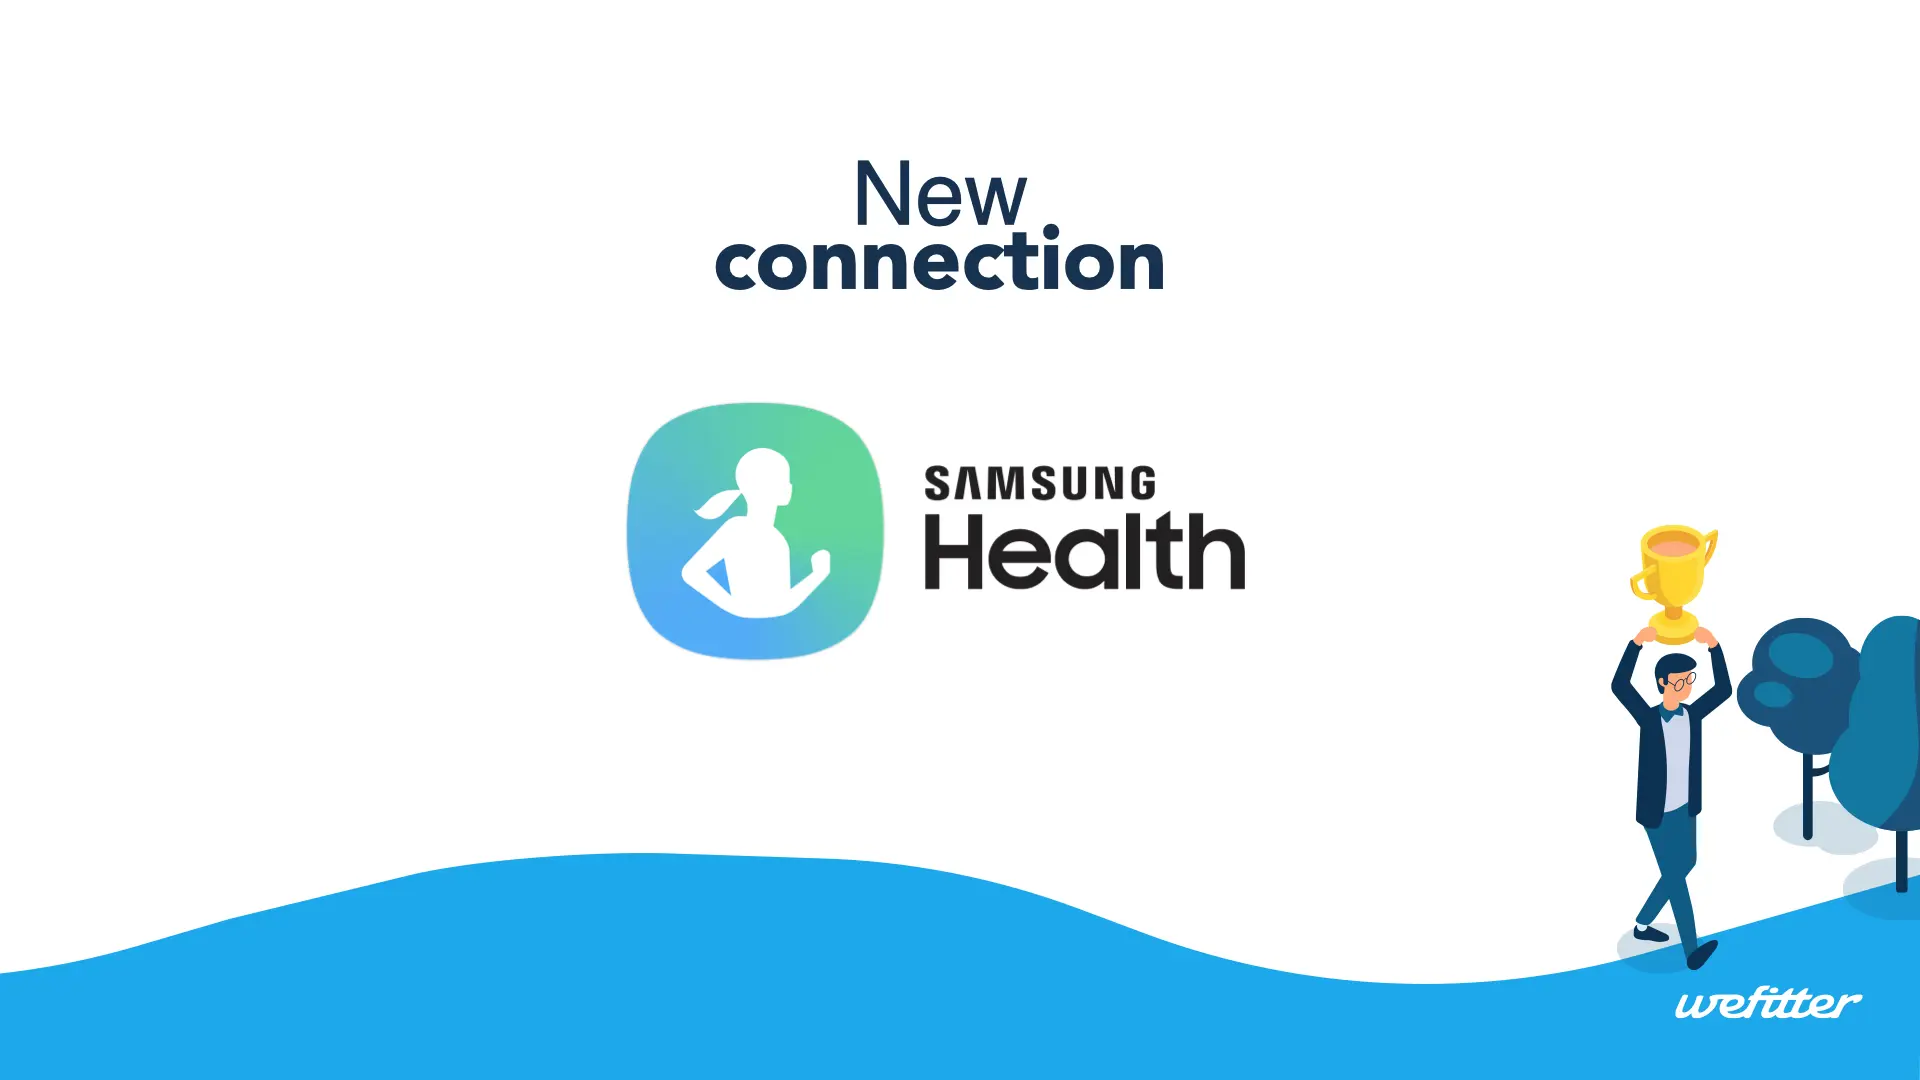 New connection: Samsung Health